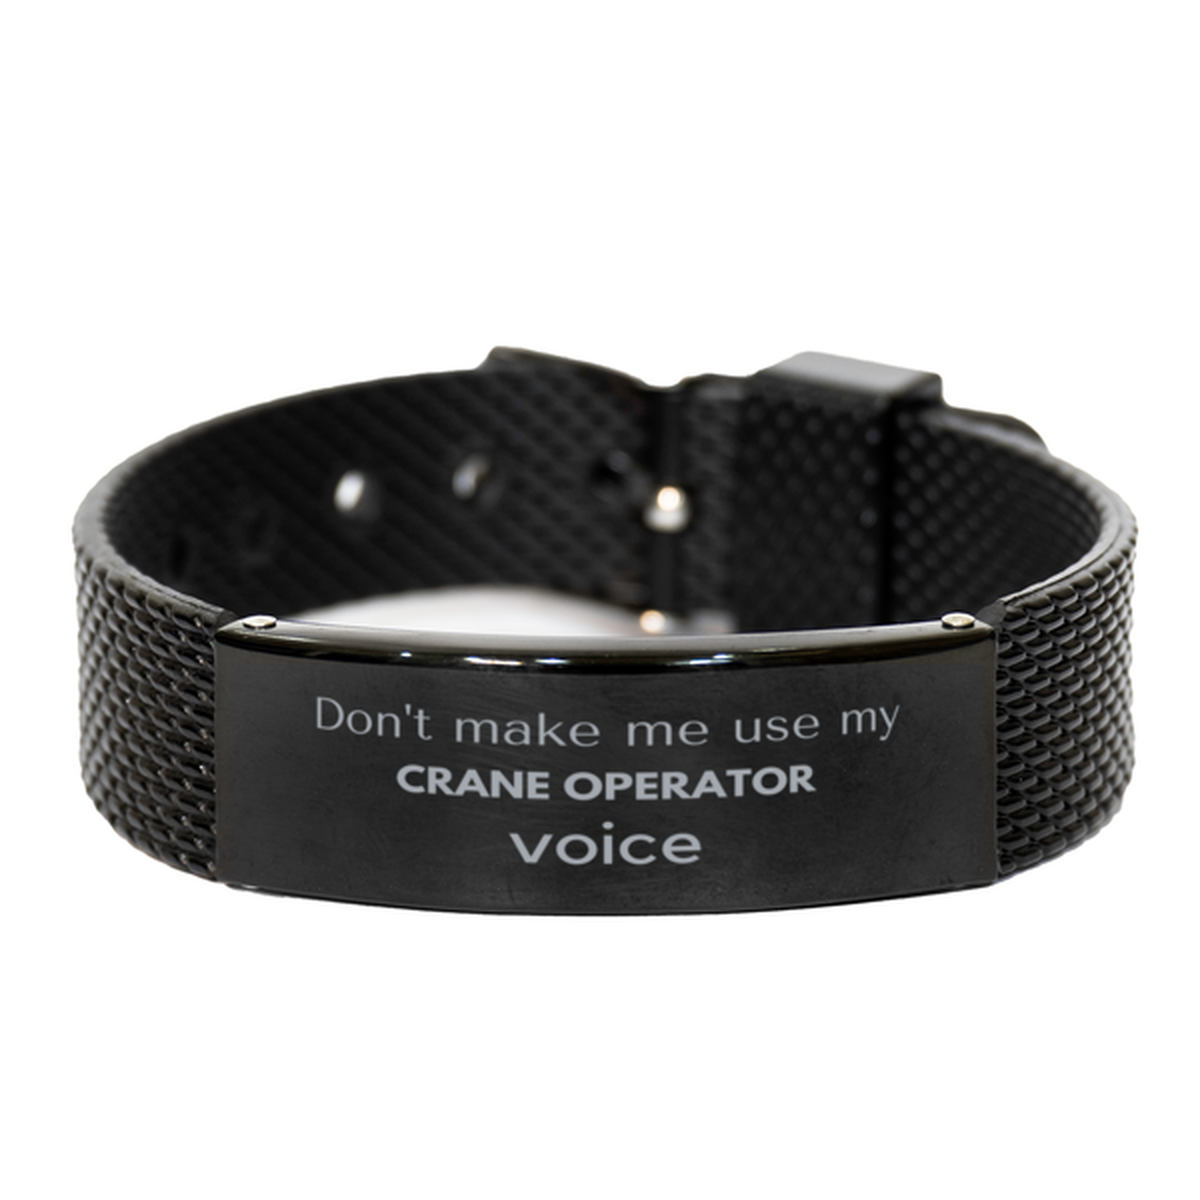 Don't make me use my Crane Operator voice, Sarcasm Crane Operator Gifts, Christmas Crane Operator Black Shark Mesh Bracelet Birthday Unique Gifts For Crane Operator Coworkers, Men, Women, Colleague, Friends